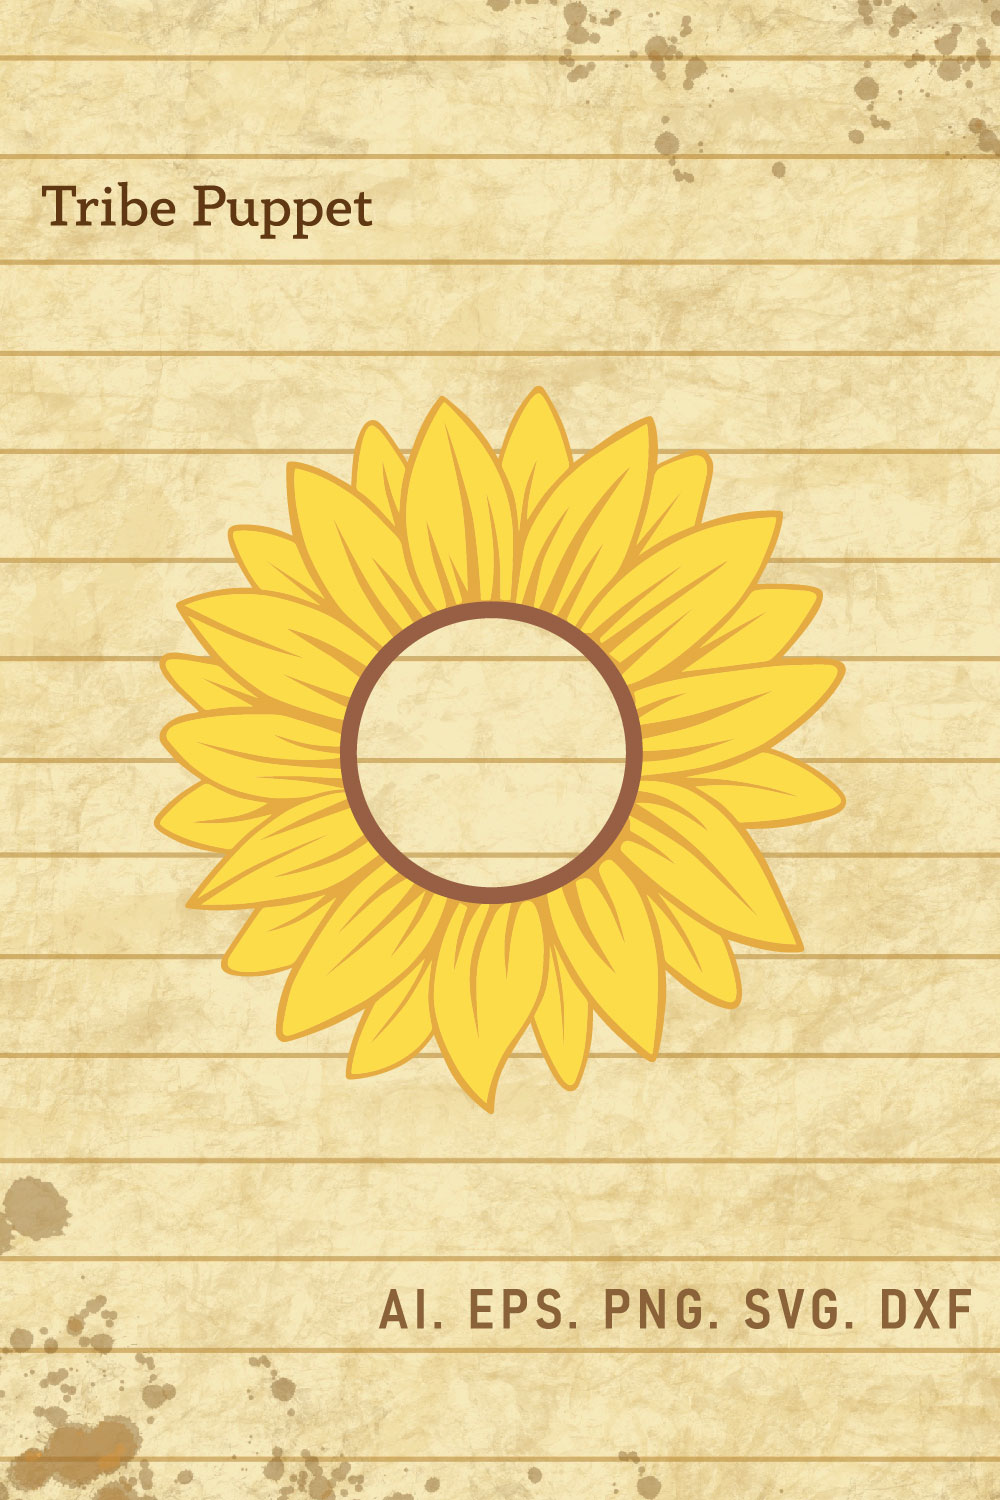 Sunflower 12 pinterest preview image.